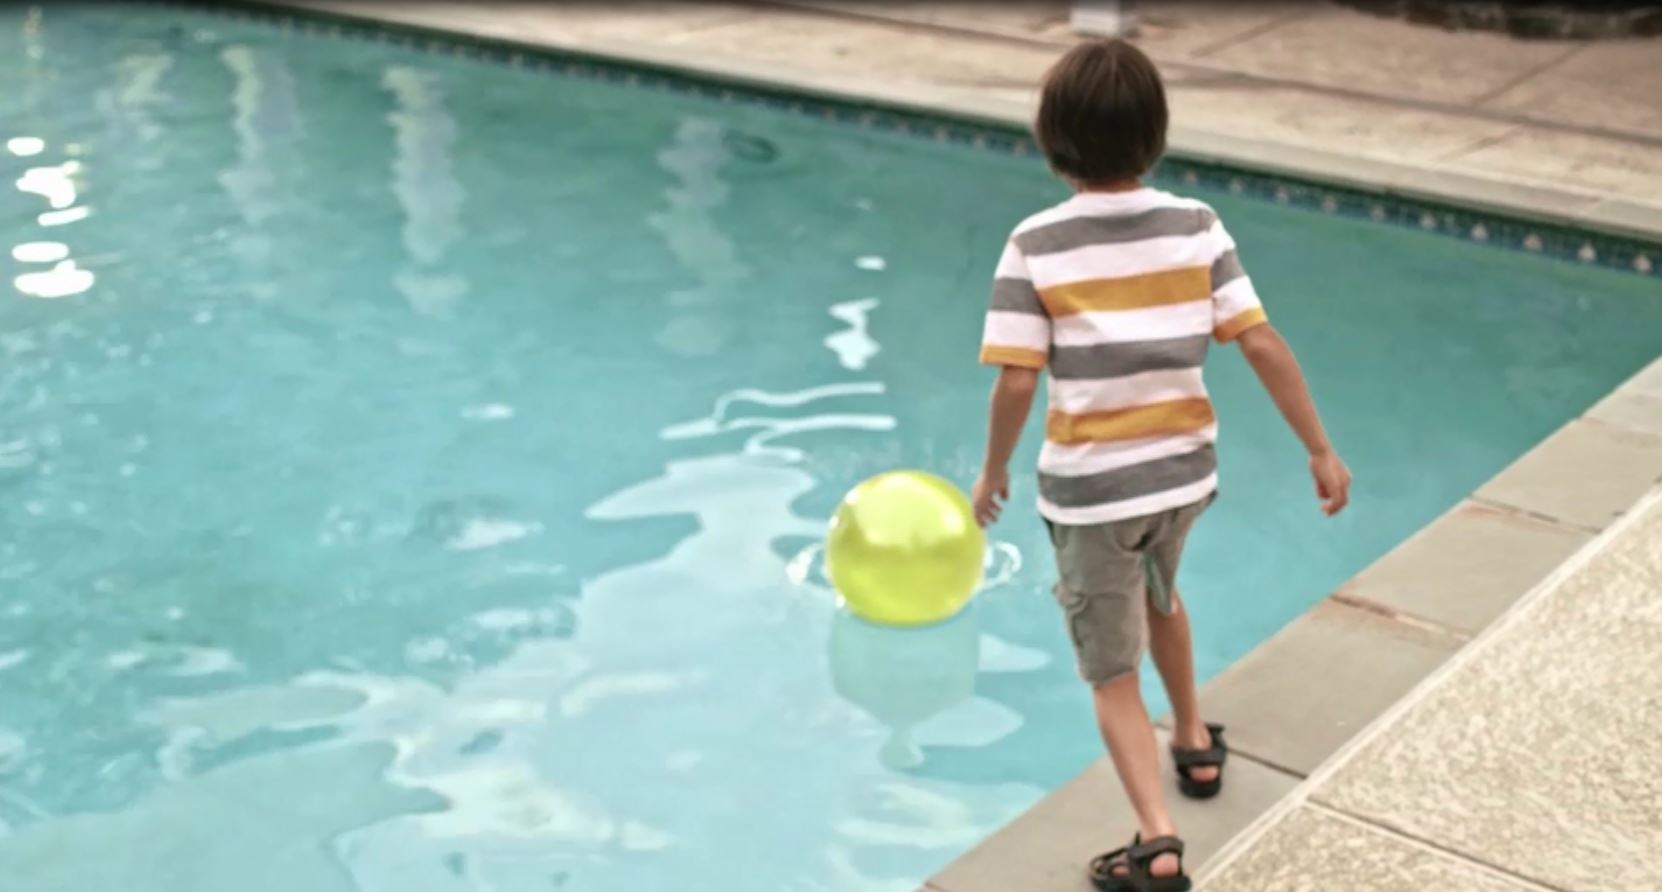 Boy looking at a ball in the pool